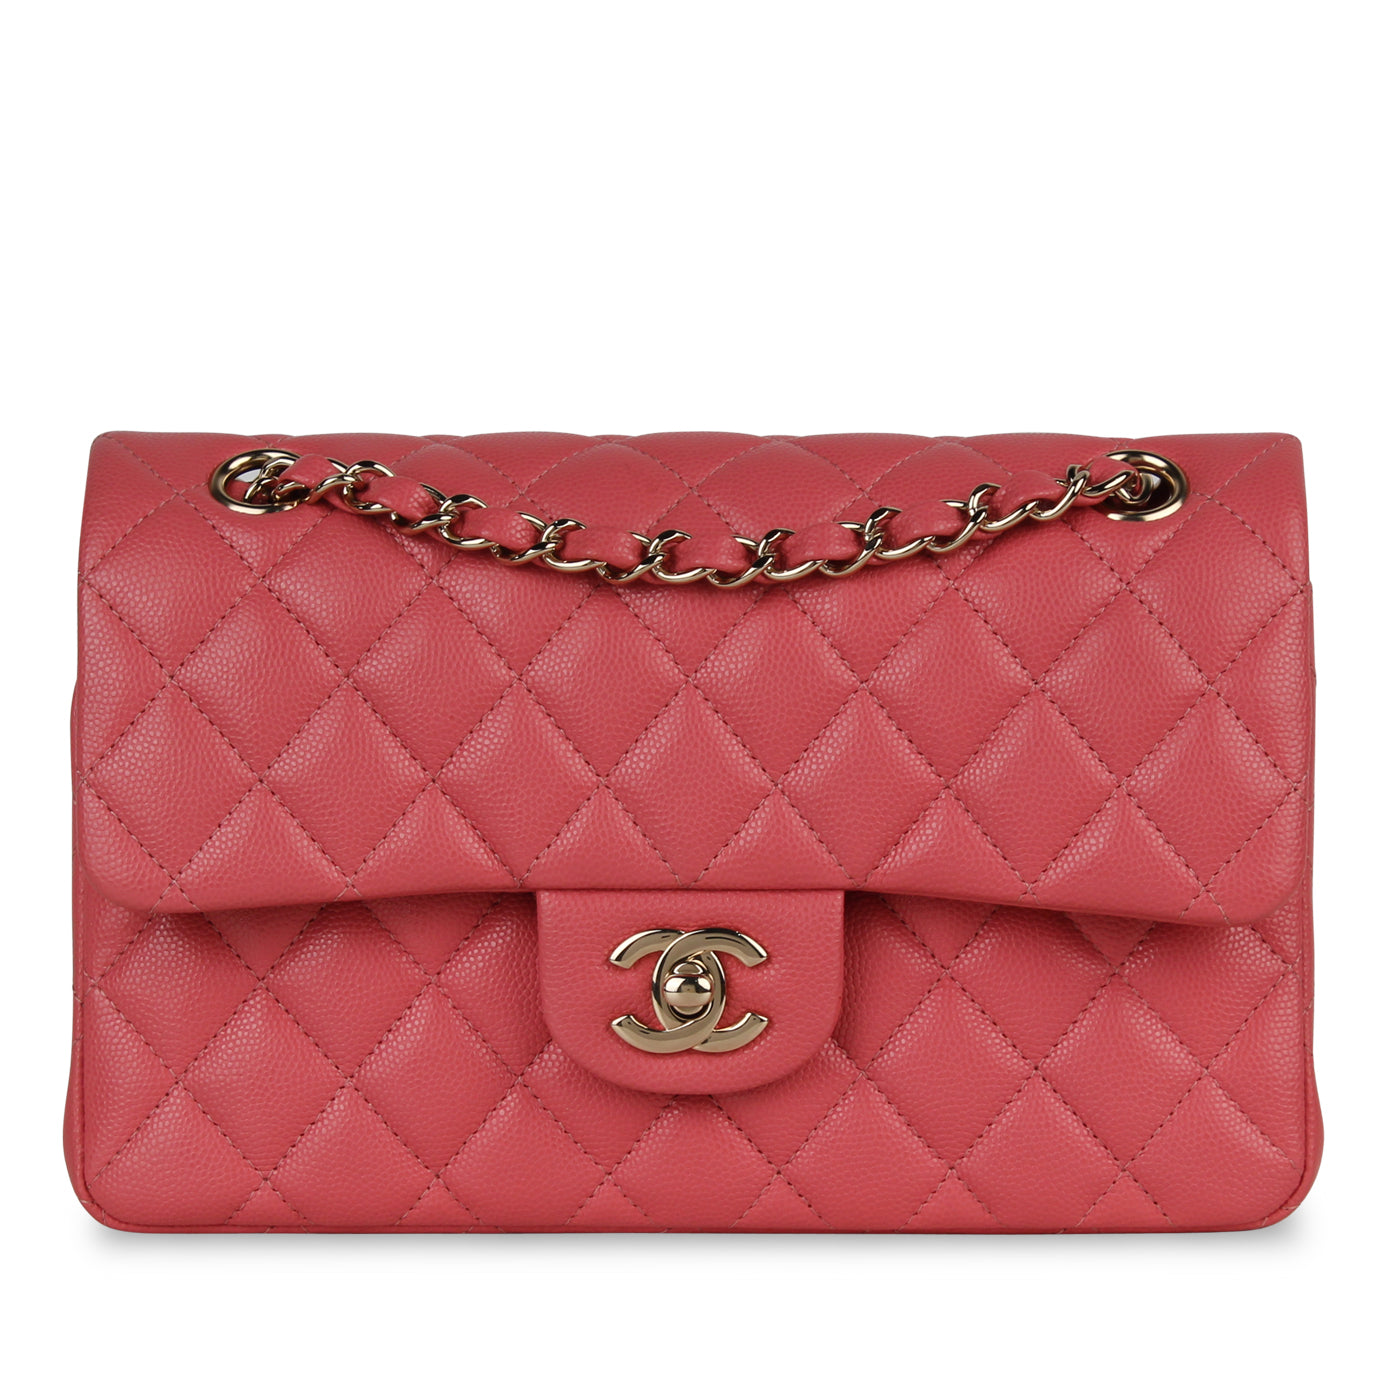 Chanel Small Classic Flap - Pink Caviar - CGHW - Brand New